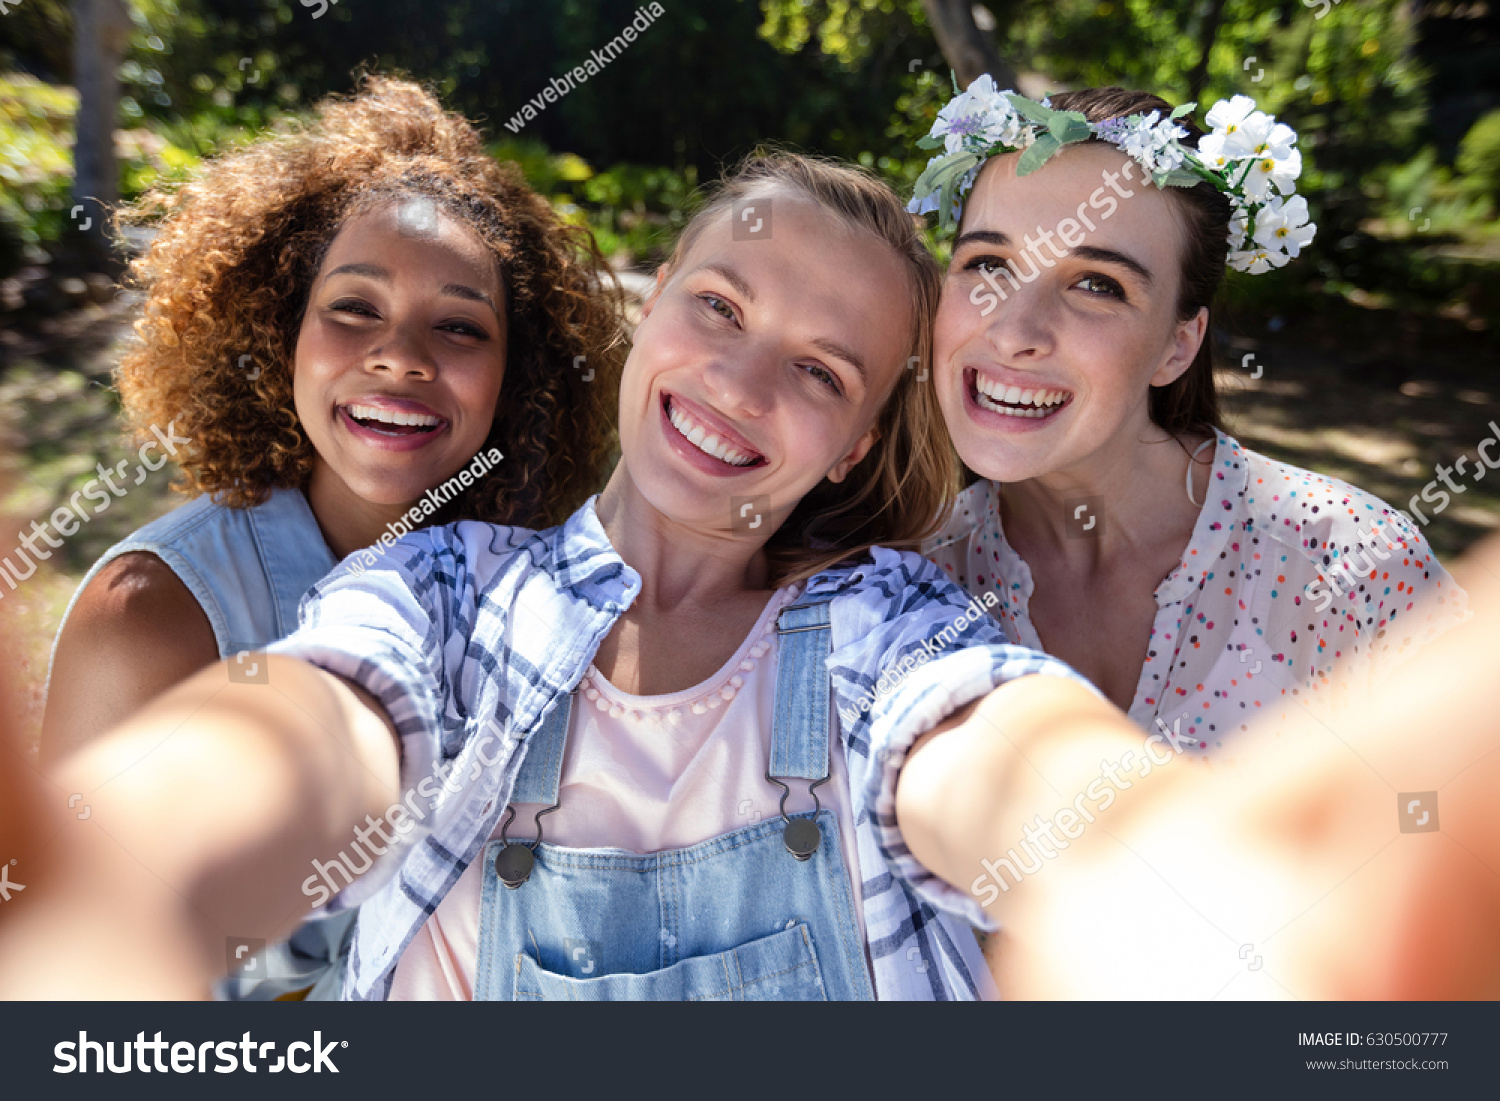 Female friends having fun in park on a sunny day #630500777